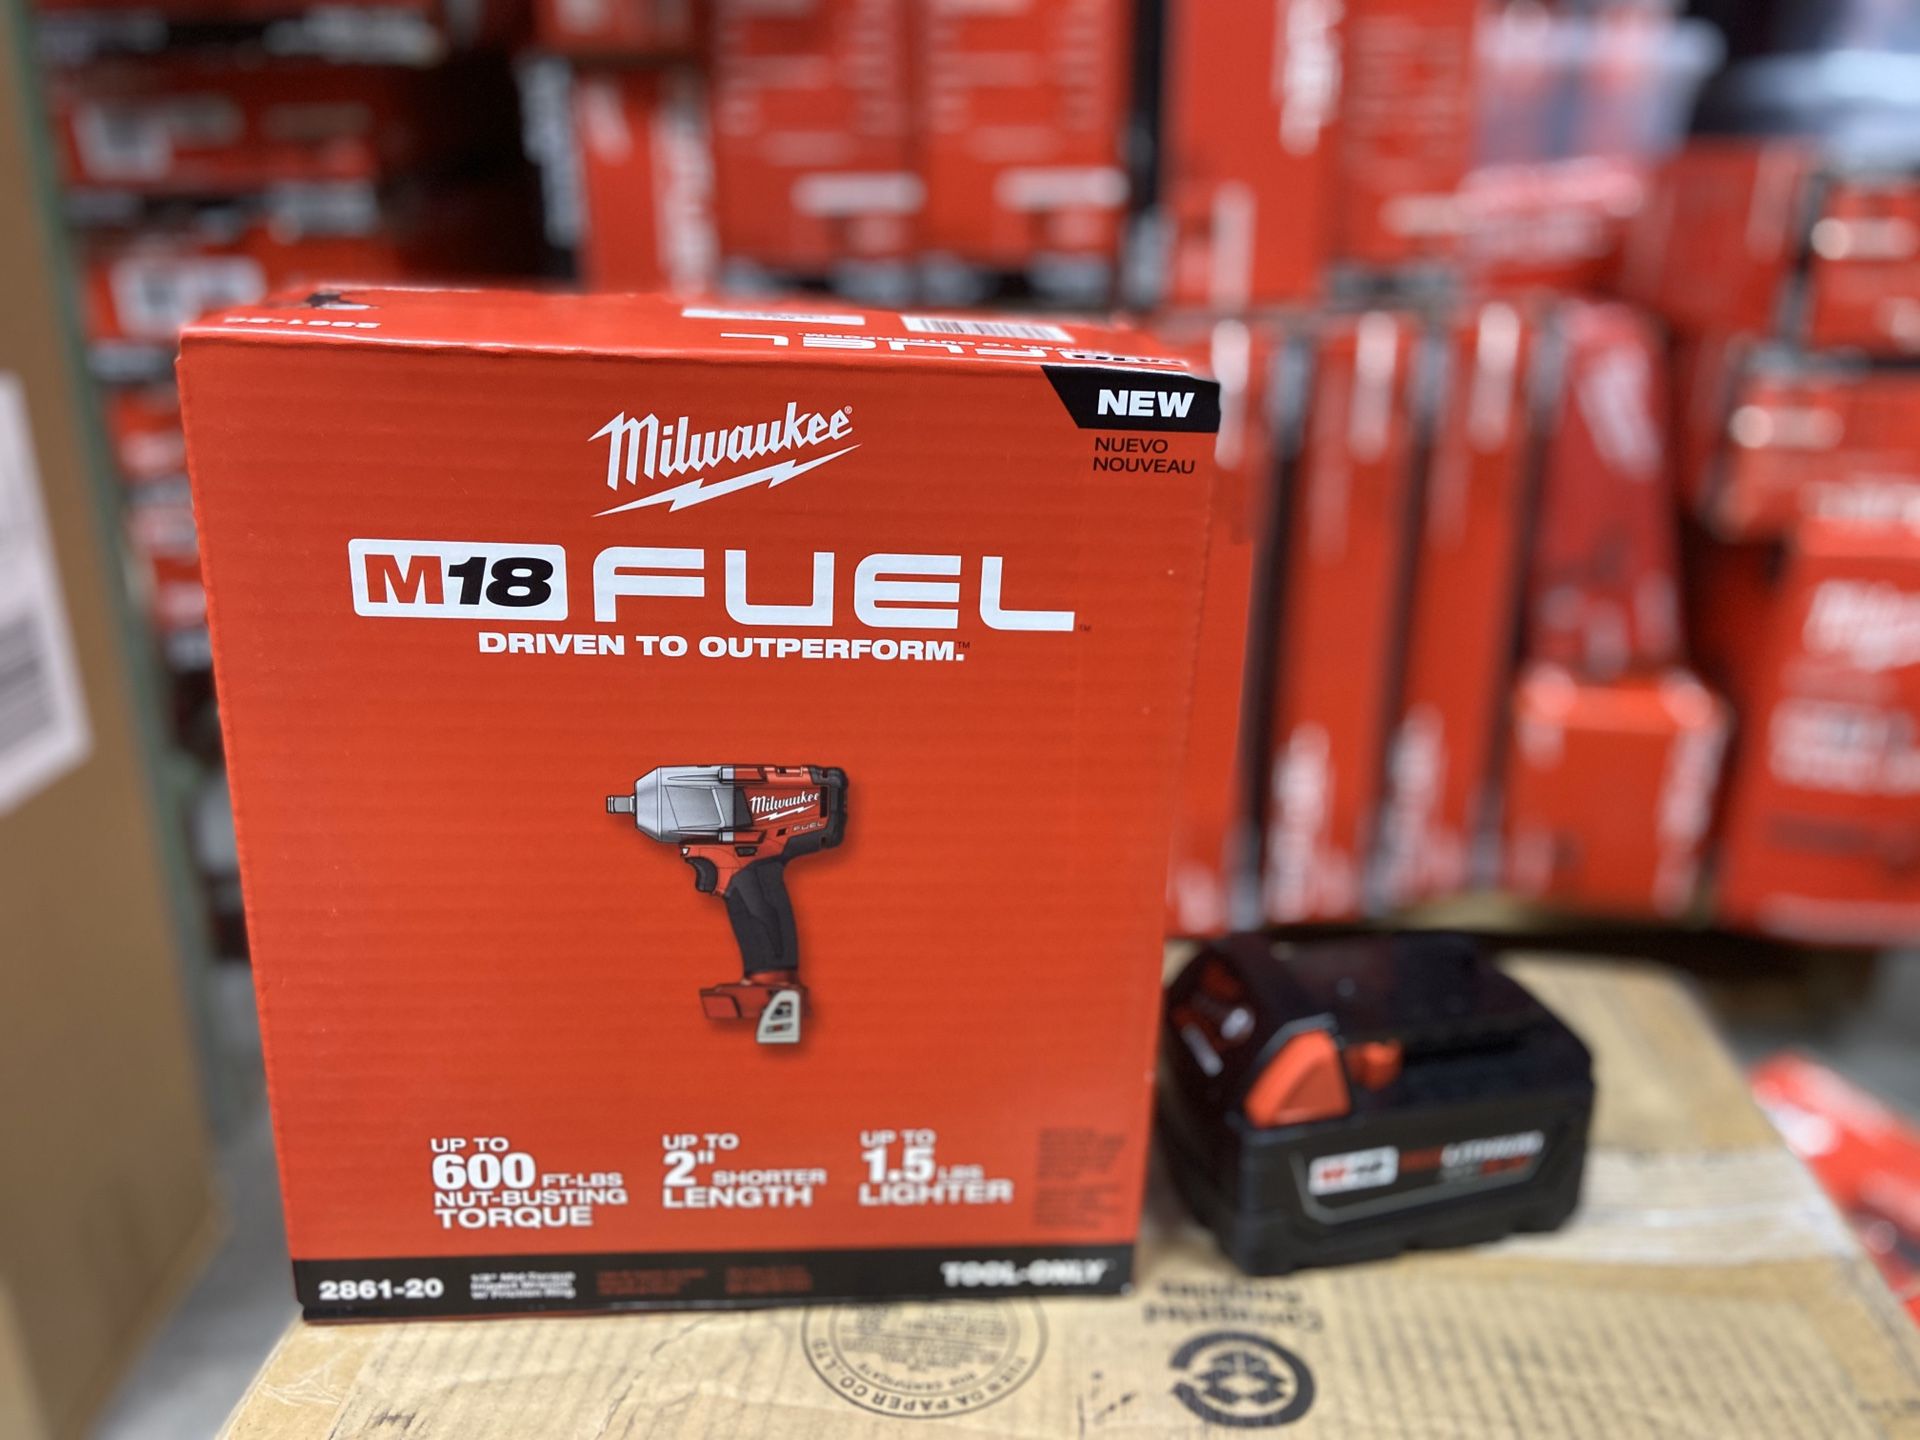 Brand new Milwaukee m18 2861-20 mid torque 1/2 impact wrench with 4.0